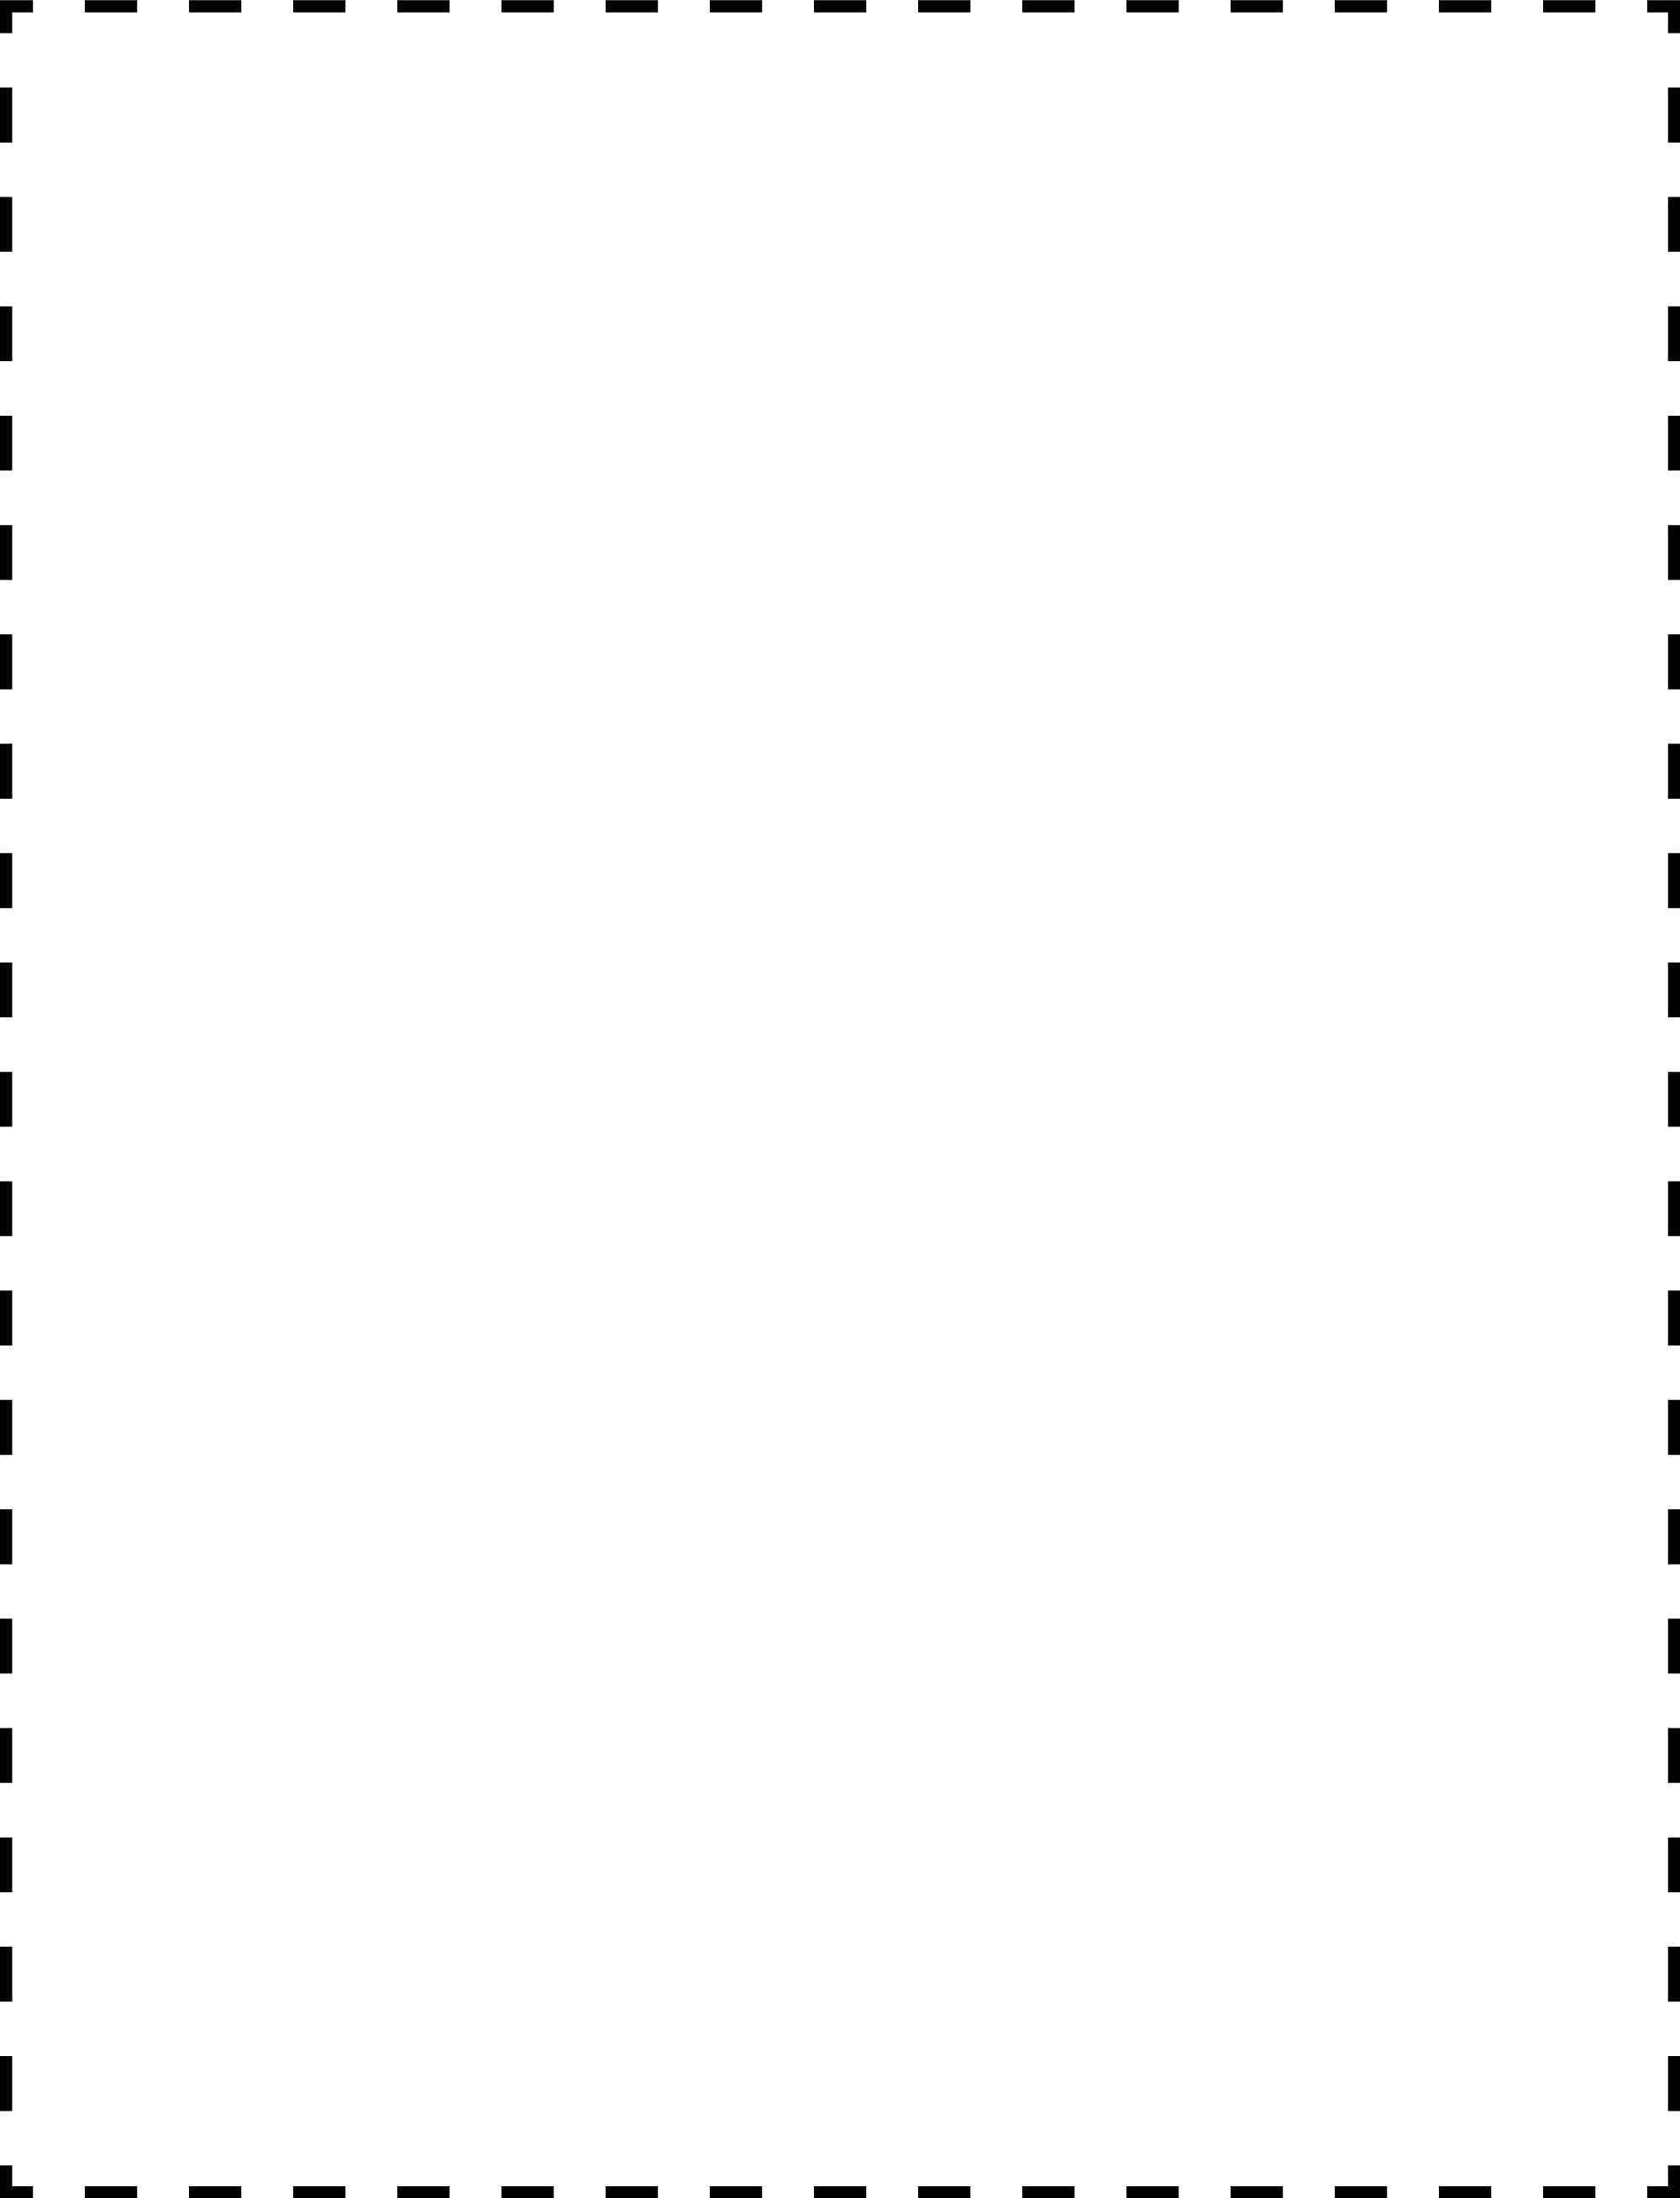 626-2284-coupon-outline-4x5-k.png